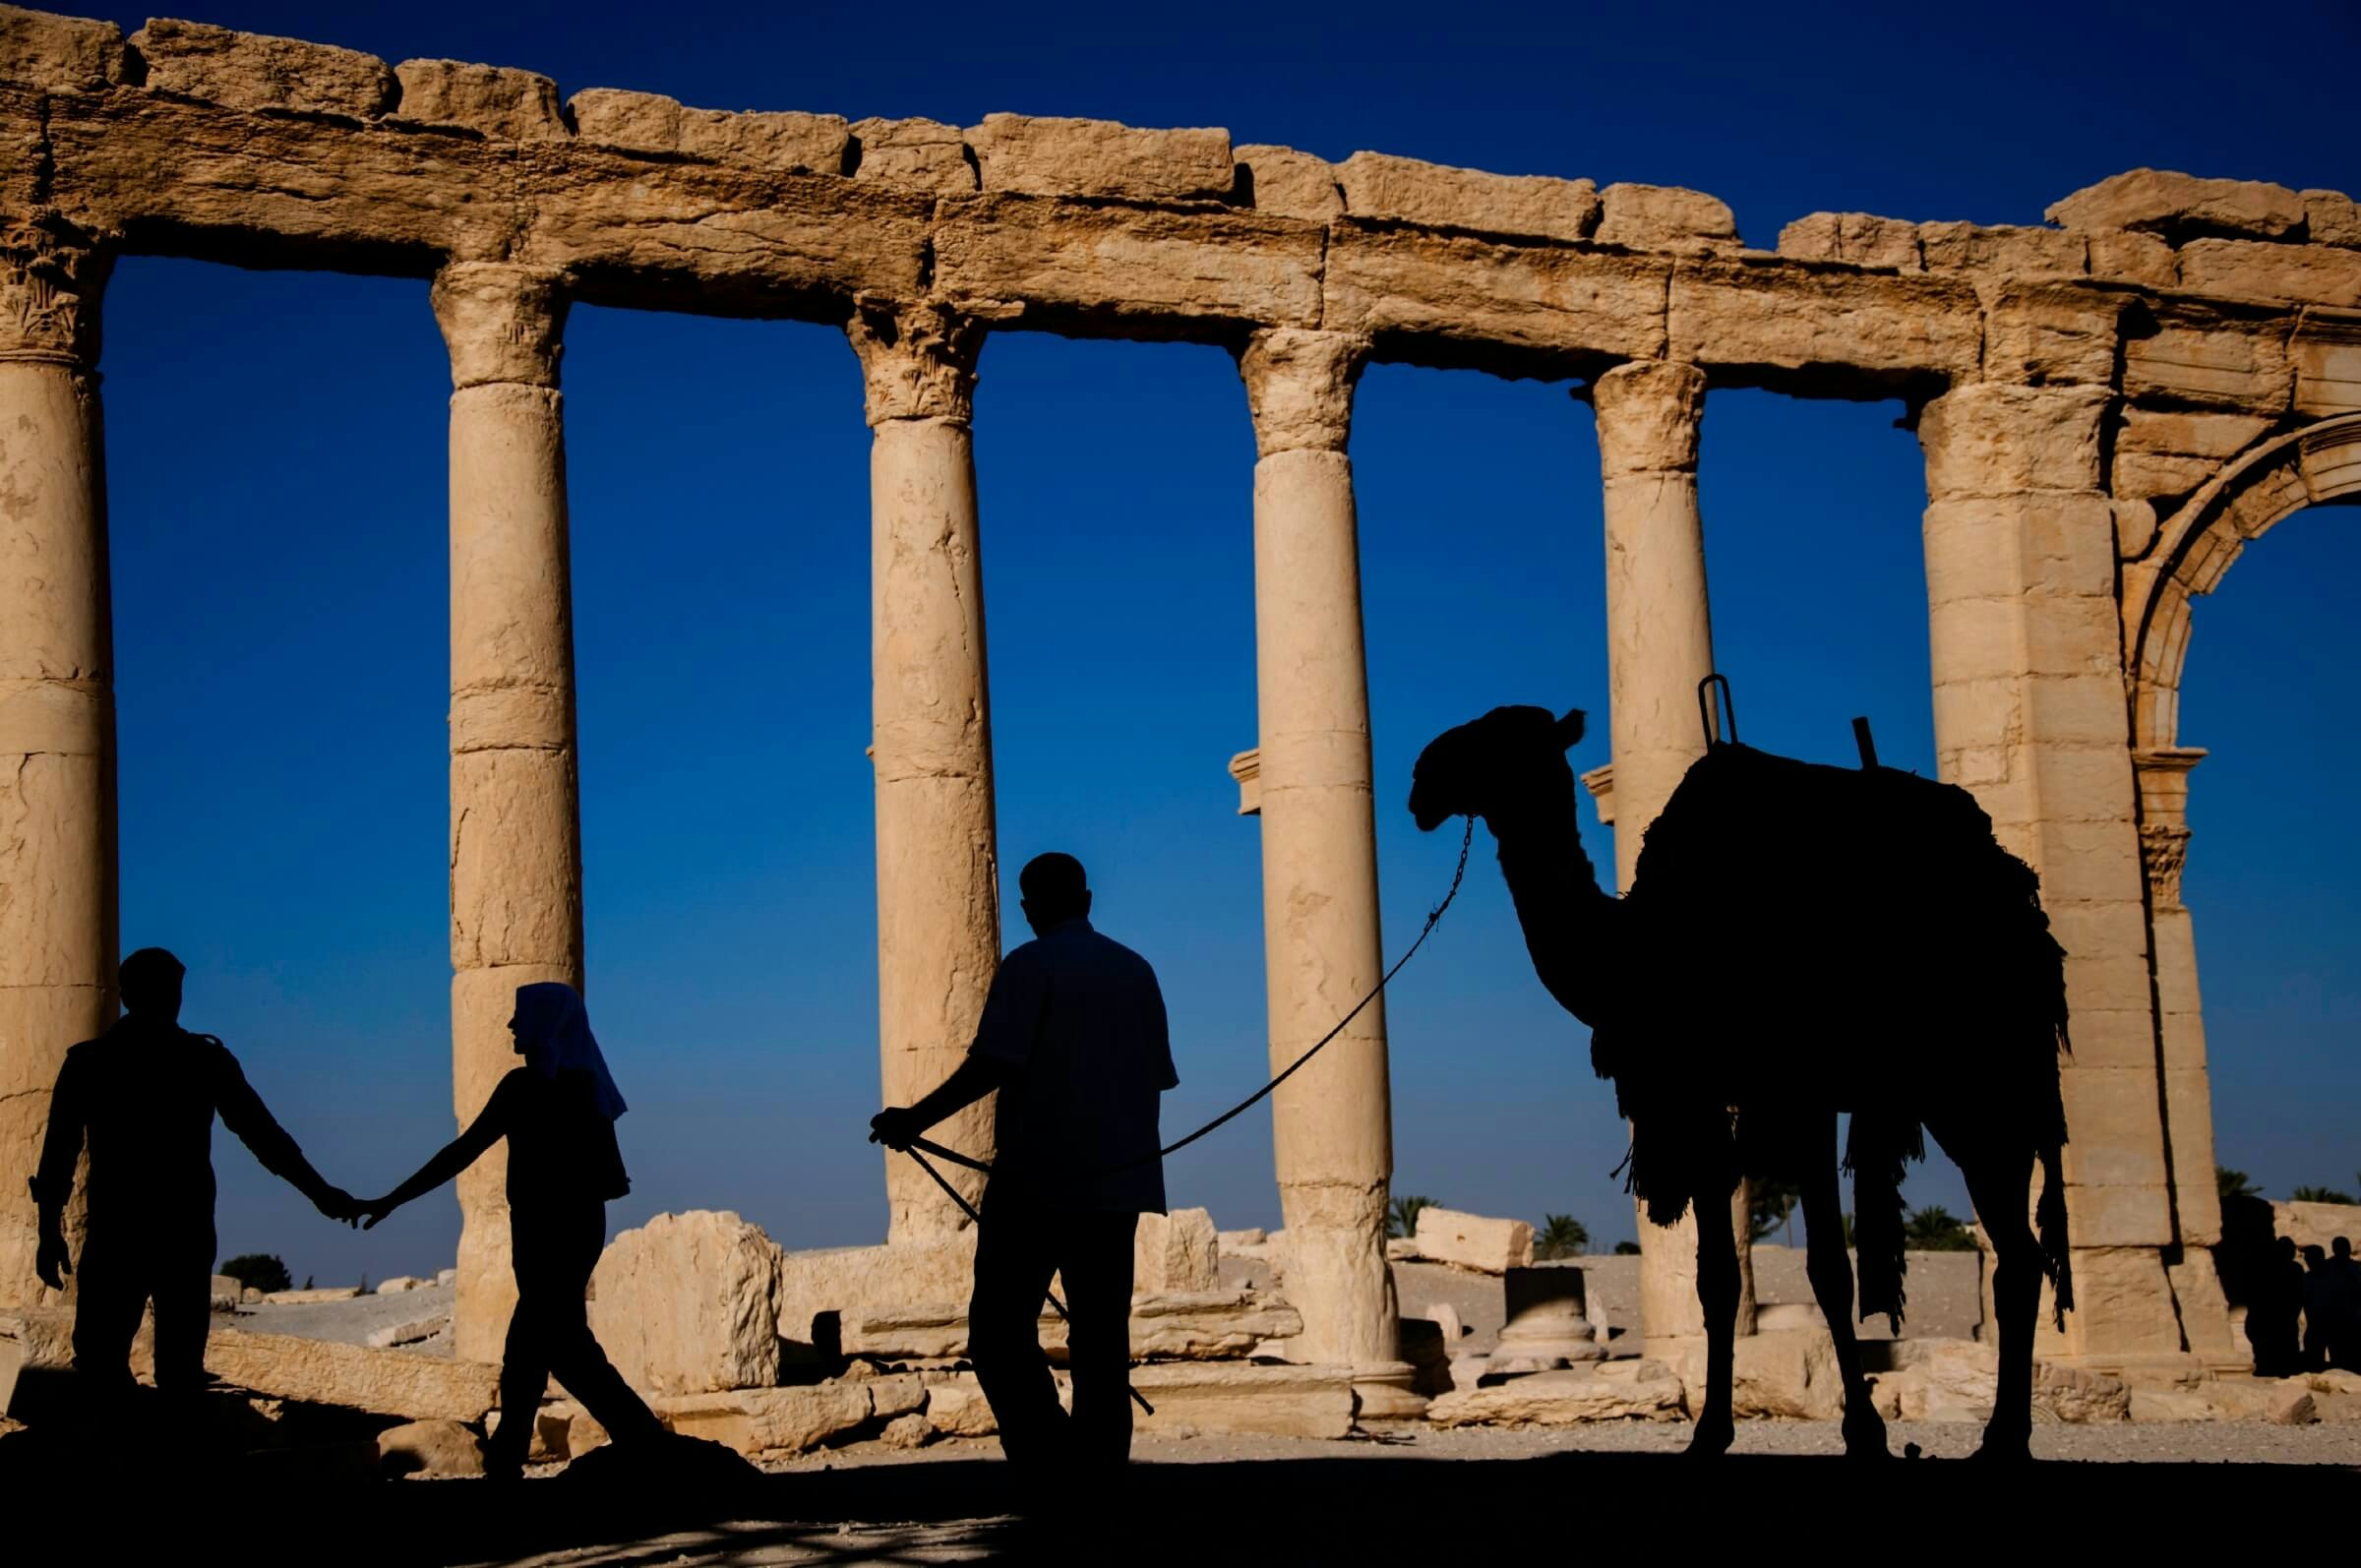 Syria's ancient city of Palmyra may open for tourists again in 2019